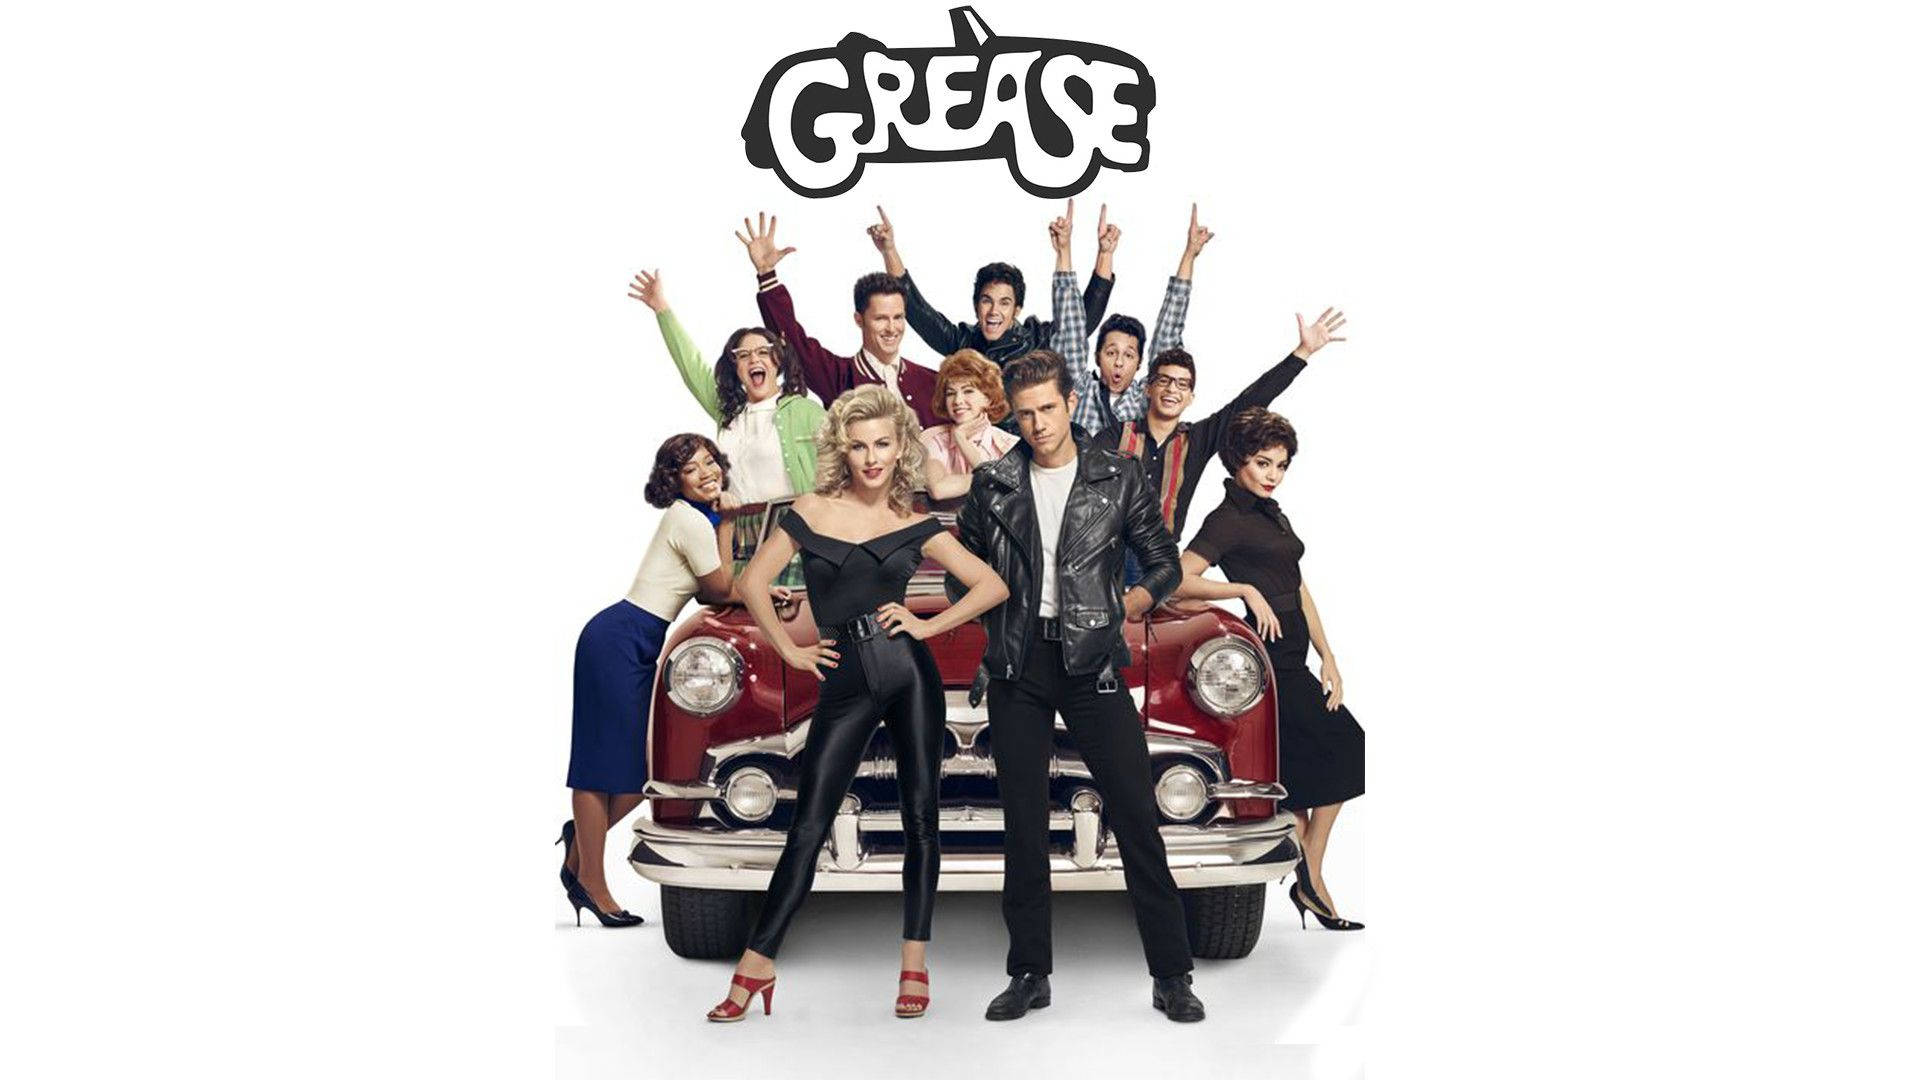 Grease Movie Remake Poster Background